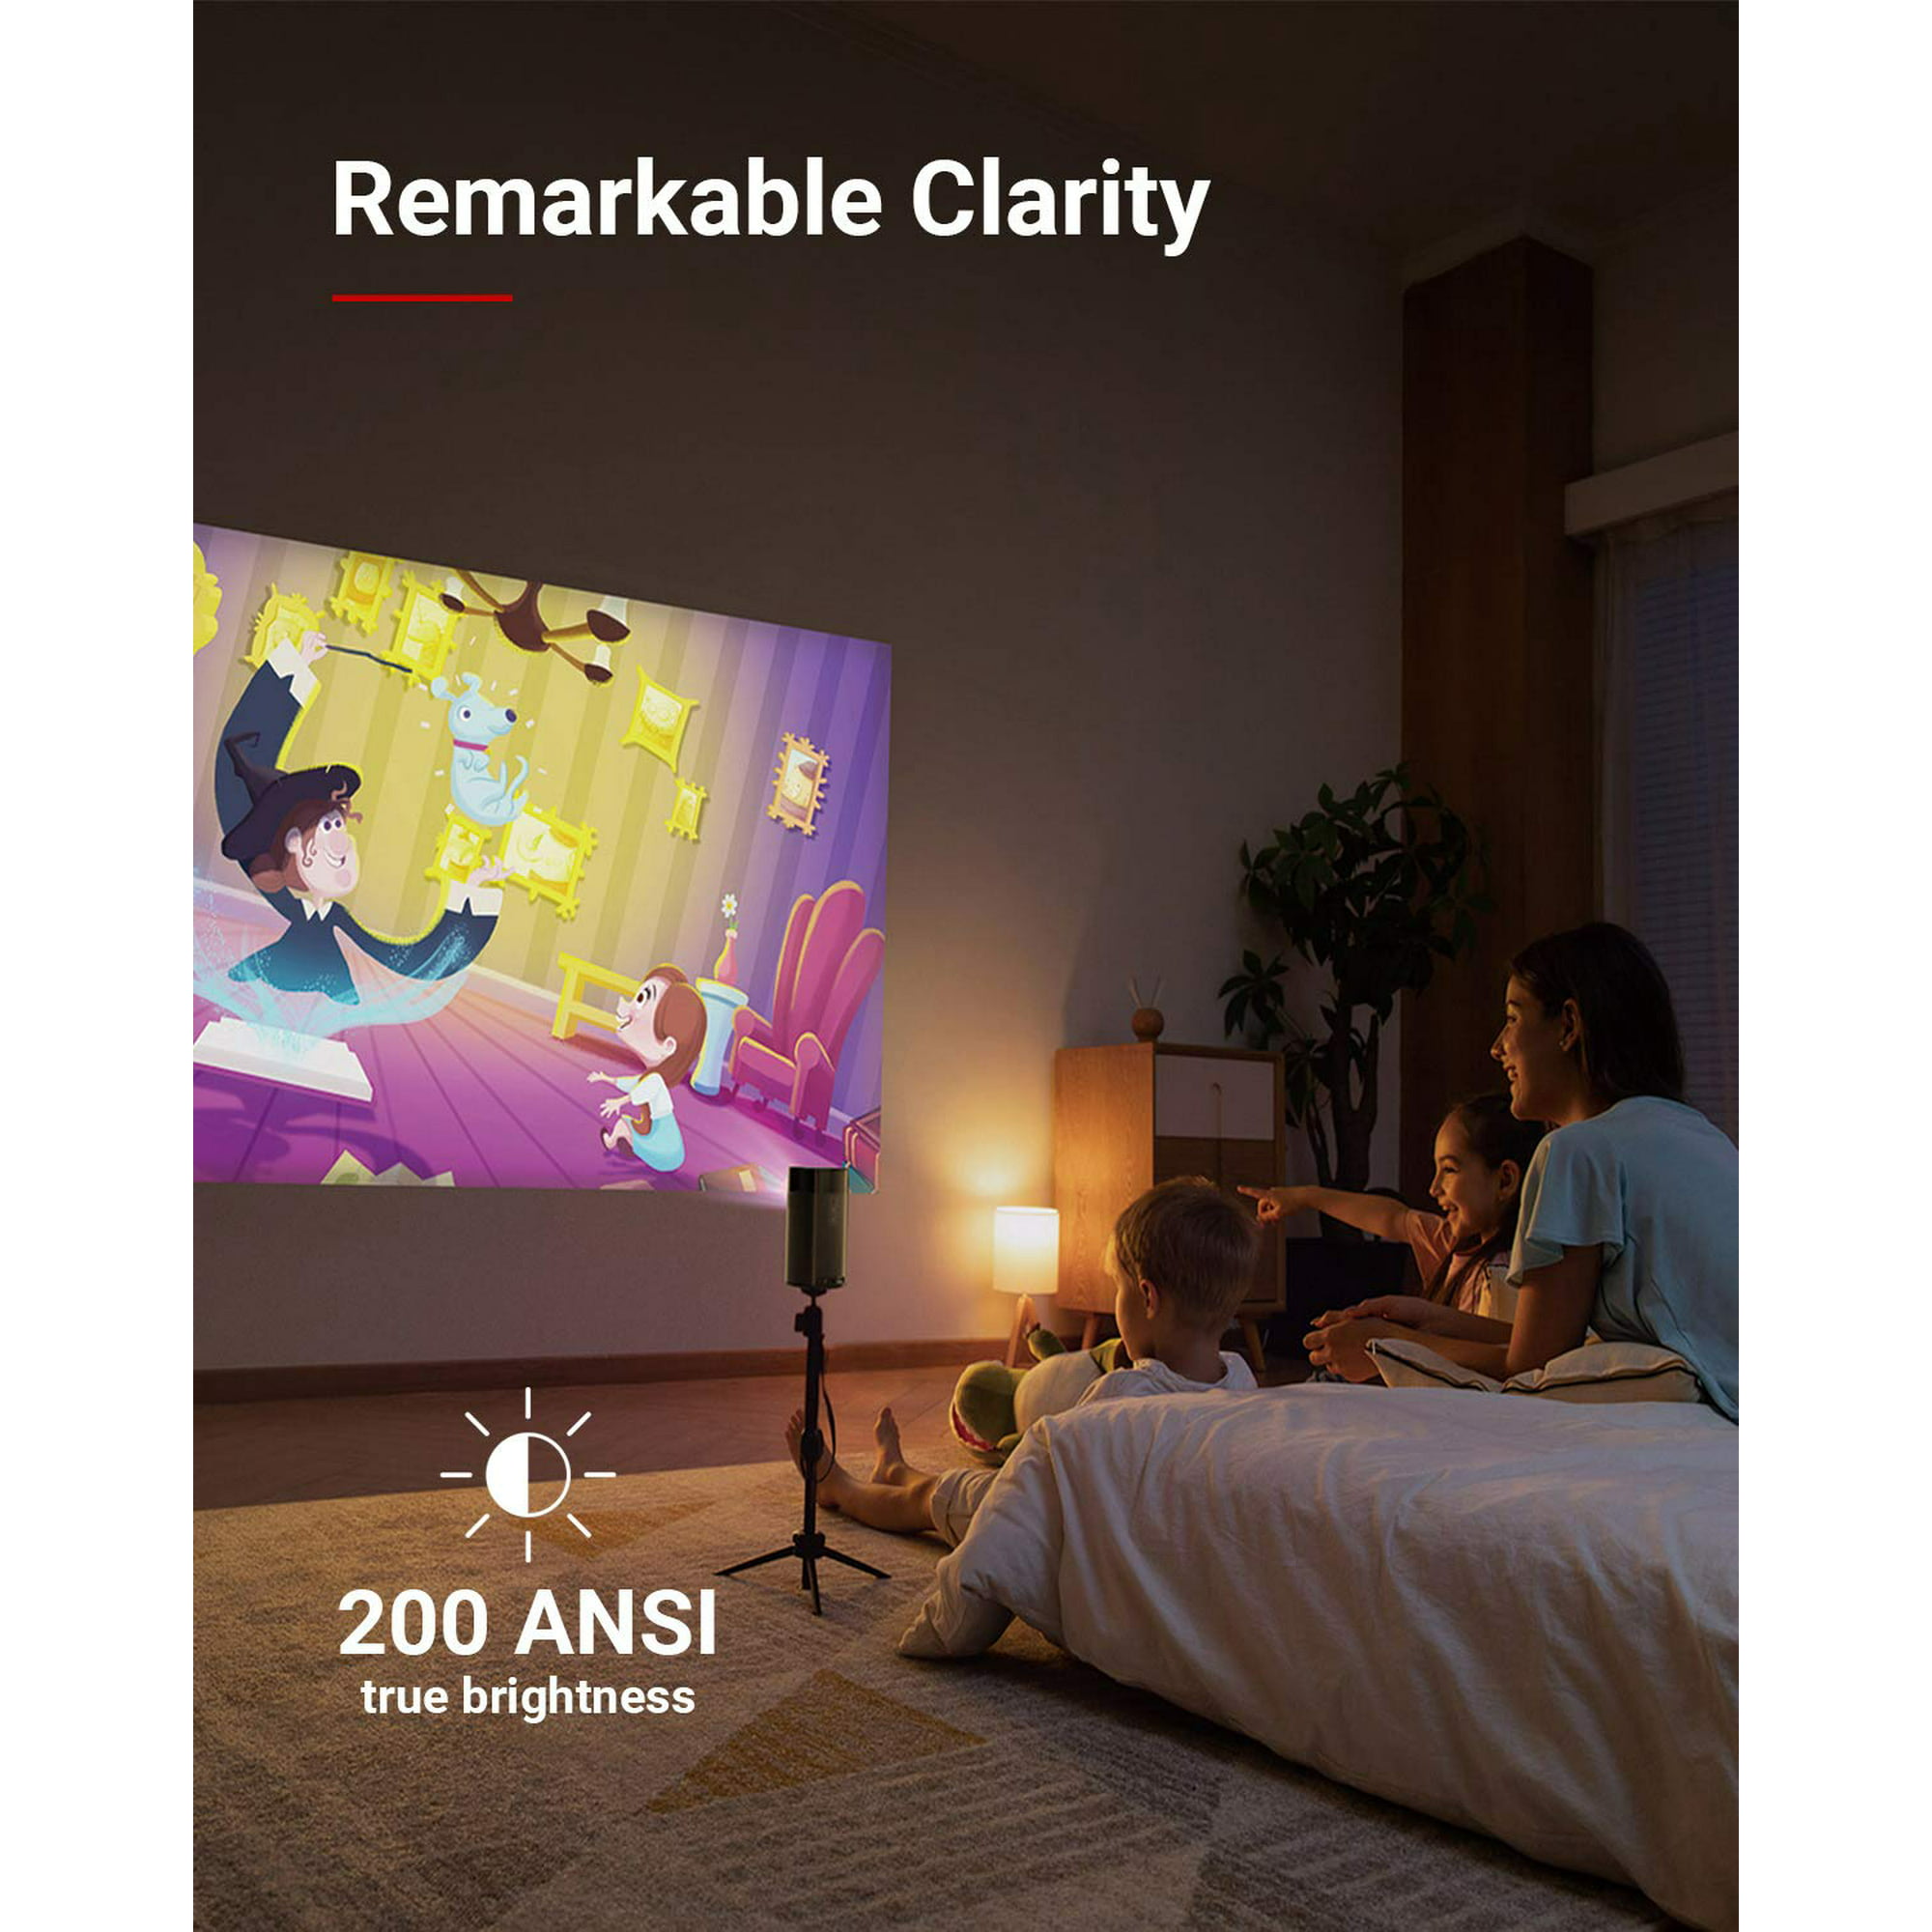 Anker Nebula Apollo, Wi-Fi Mini Projector, 200 ANSI Lumen Portable Projector, 6W Speaker, Movie Projector, 100 Inch Picture, 4-Hour Video Playtime, Outdoor Projector—Watch Anywhere